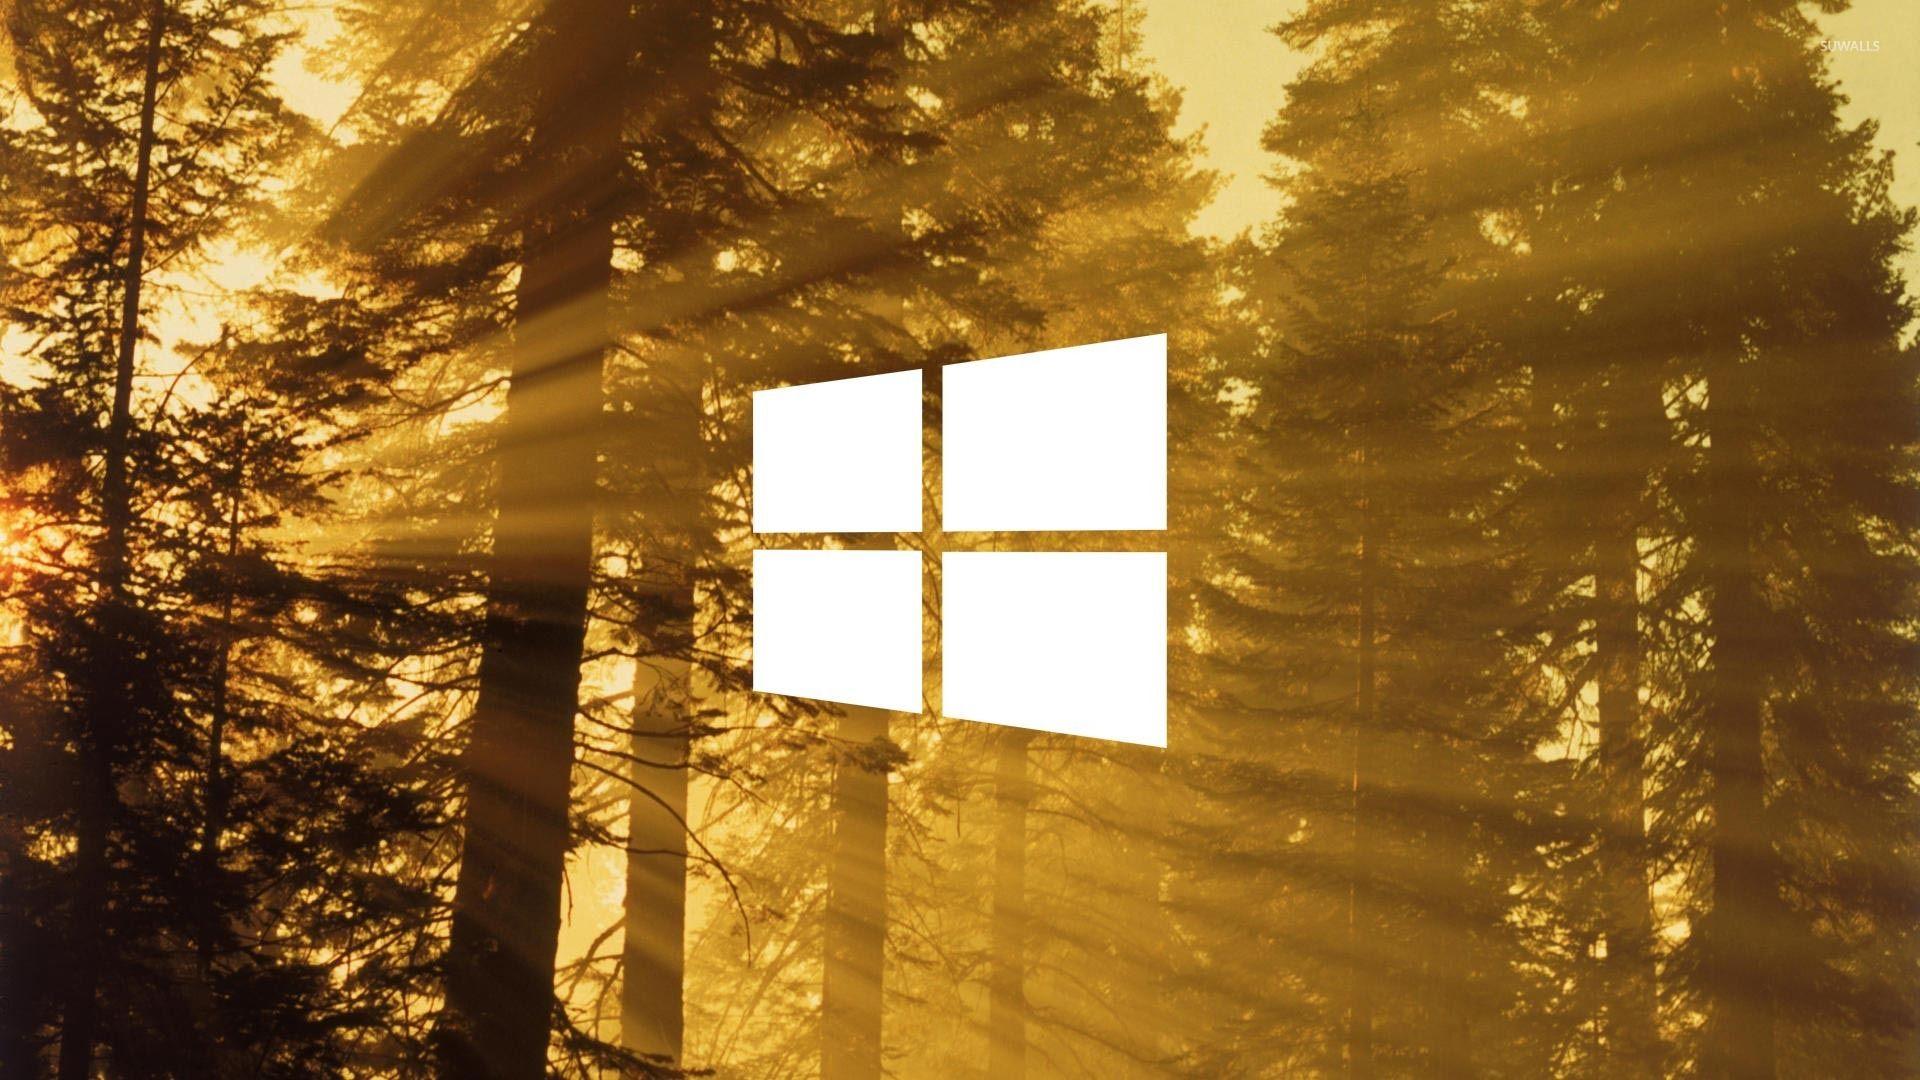 Windows 10 on sun rays in the forest simple white logo wallpaper wallpaper